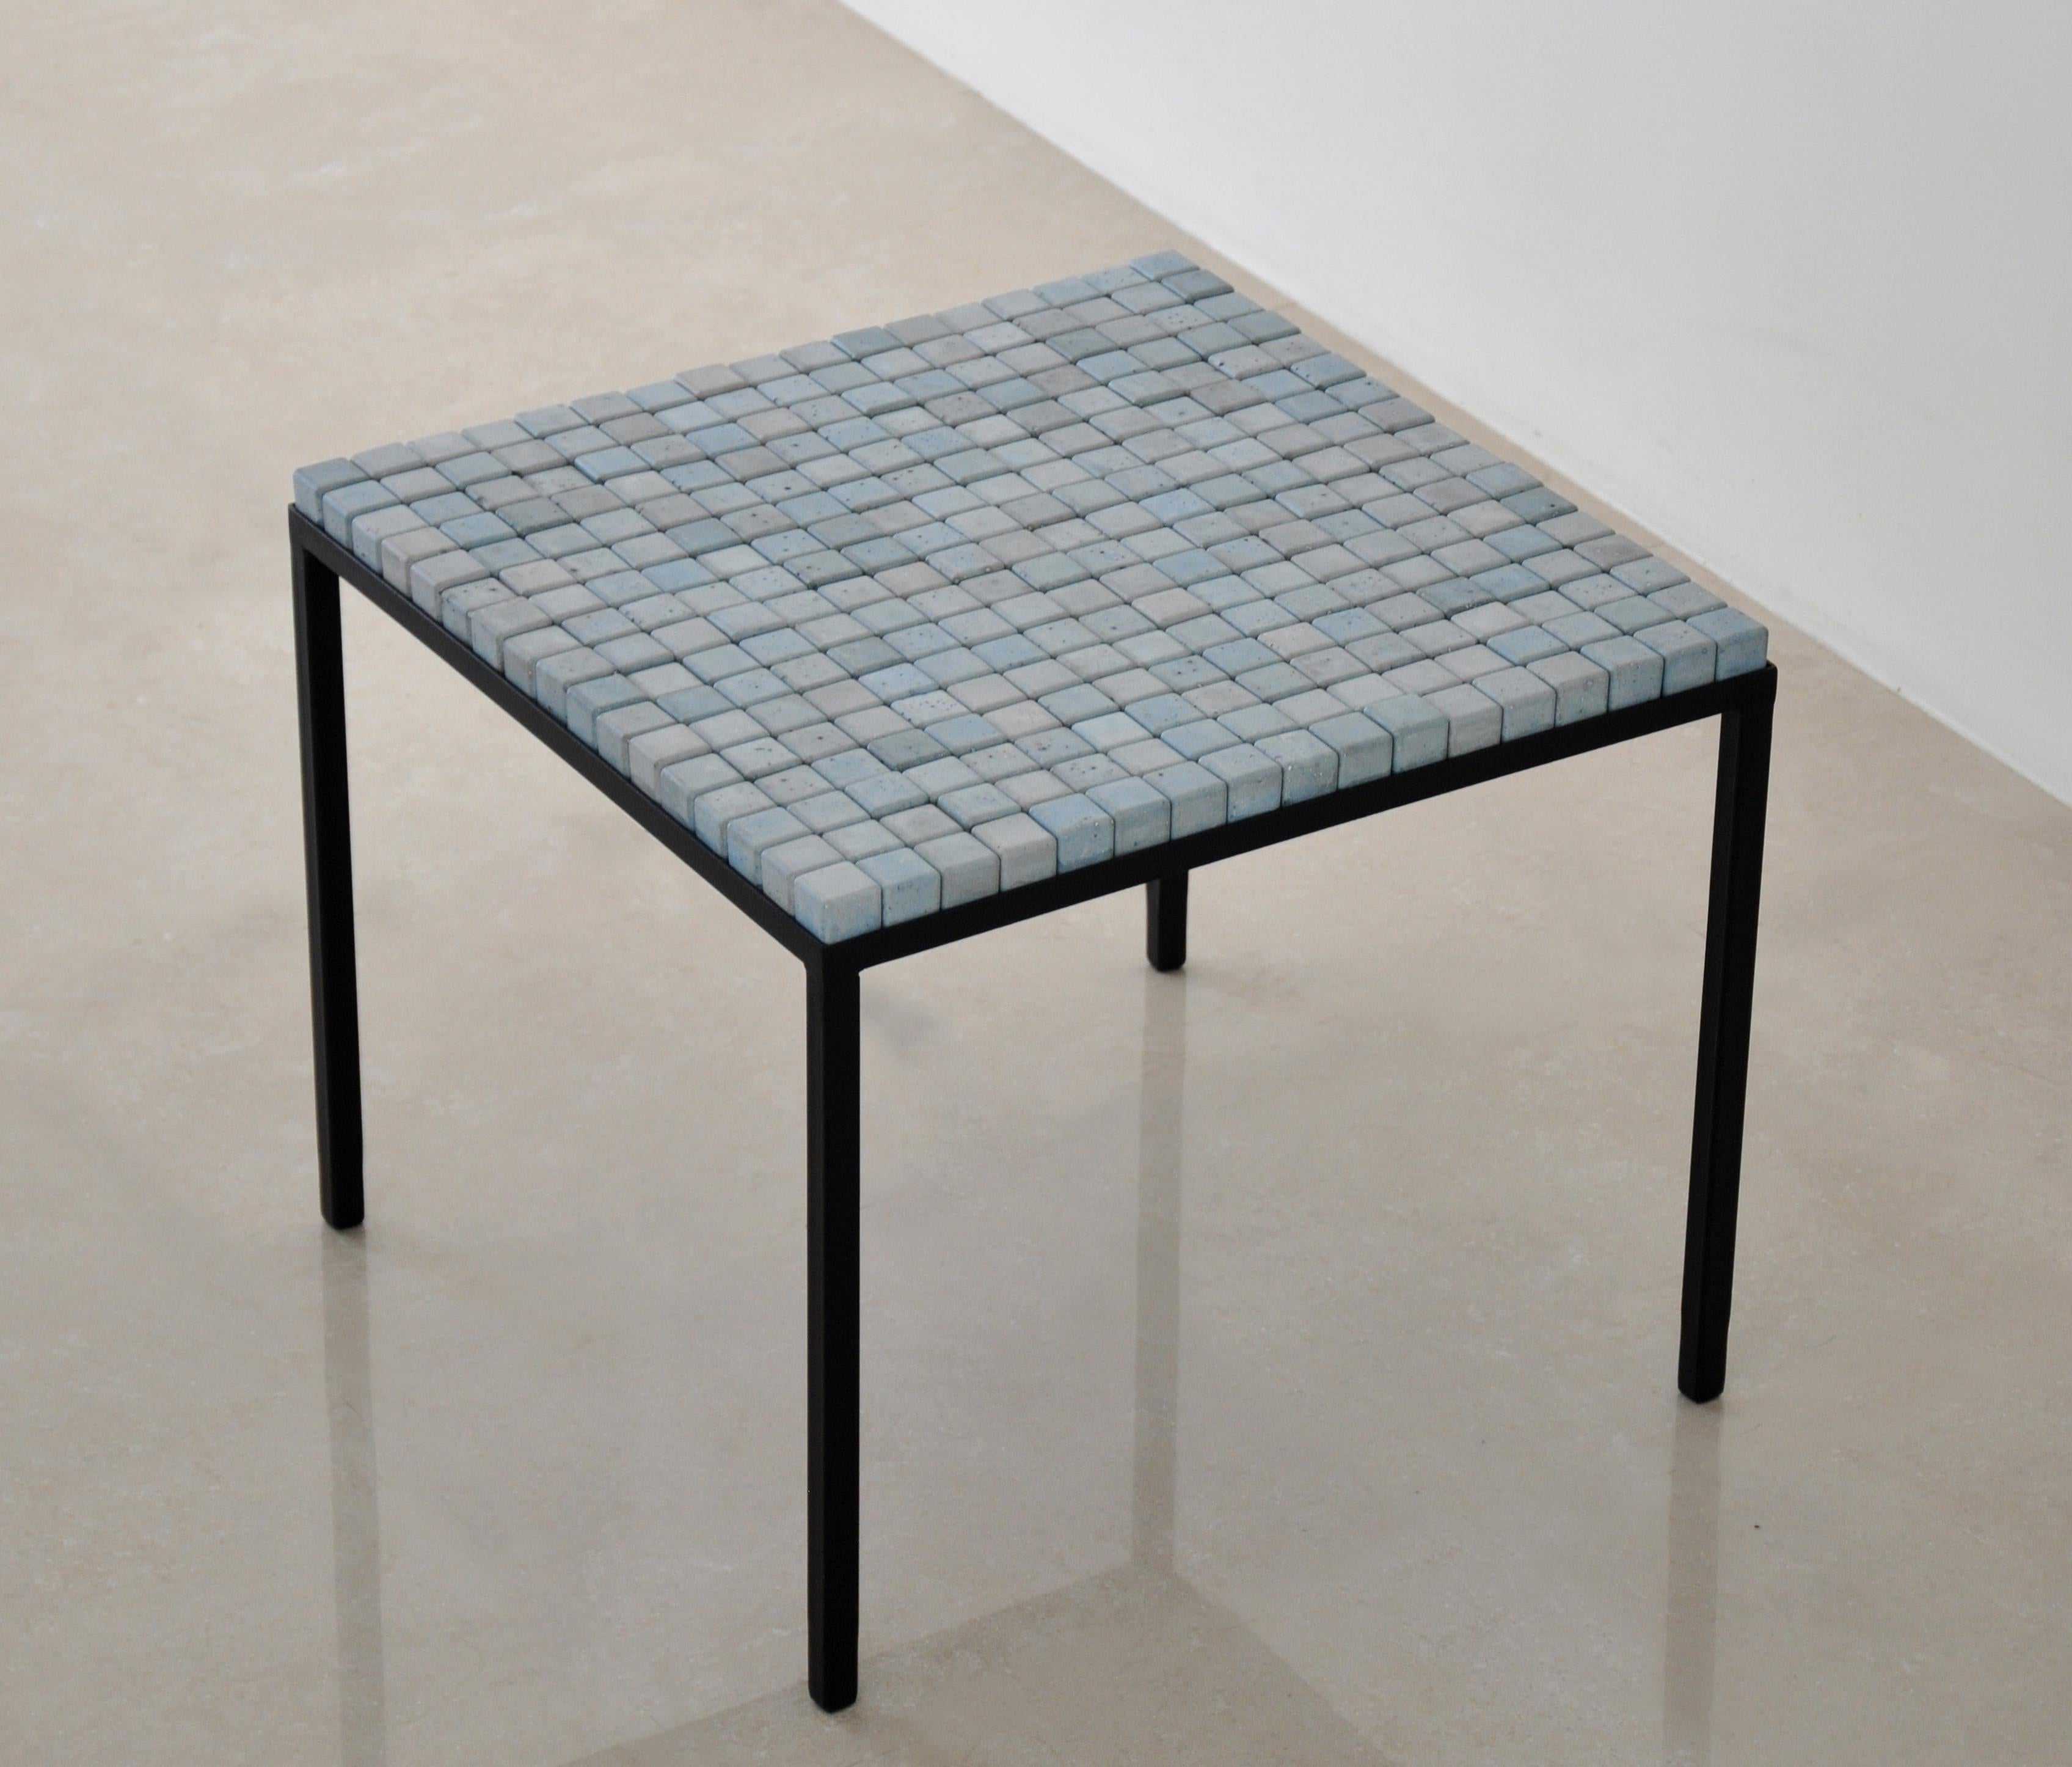 Concrete blue cube table by Miriam Loellmann
Edition of 10
Signed
Materials: colored concrete, steel (hand painted), leather
Dimensions: 56.5 x 56.5 x 56.5 cm
Weight: 22 kg 

Cubes are removable, each table-top is unique, one of a kind and